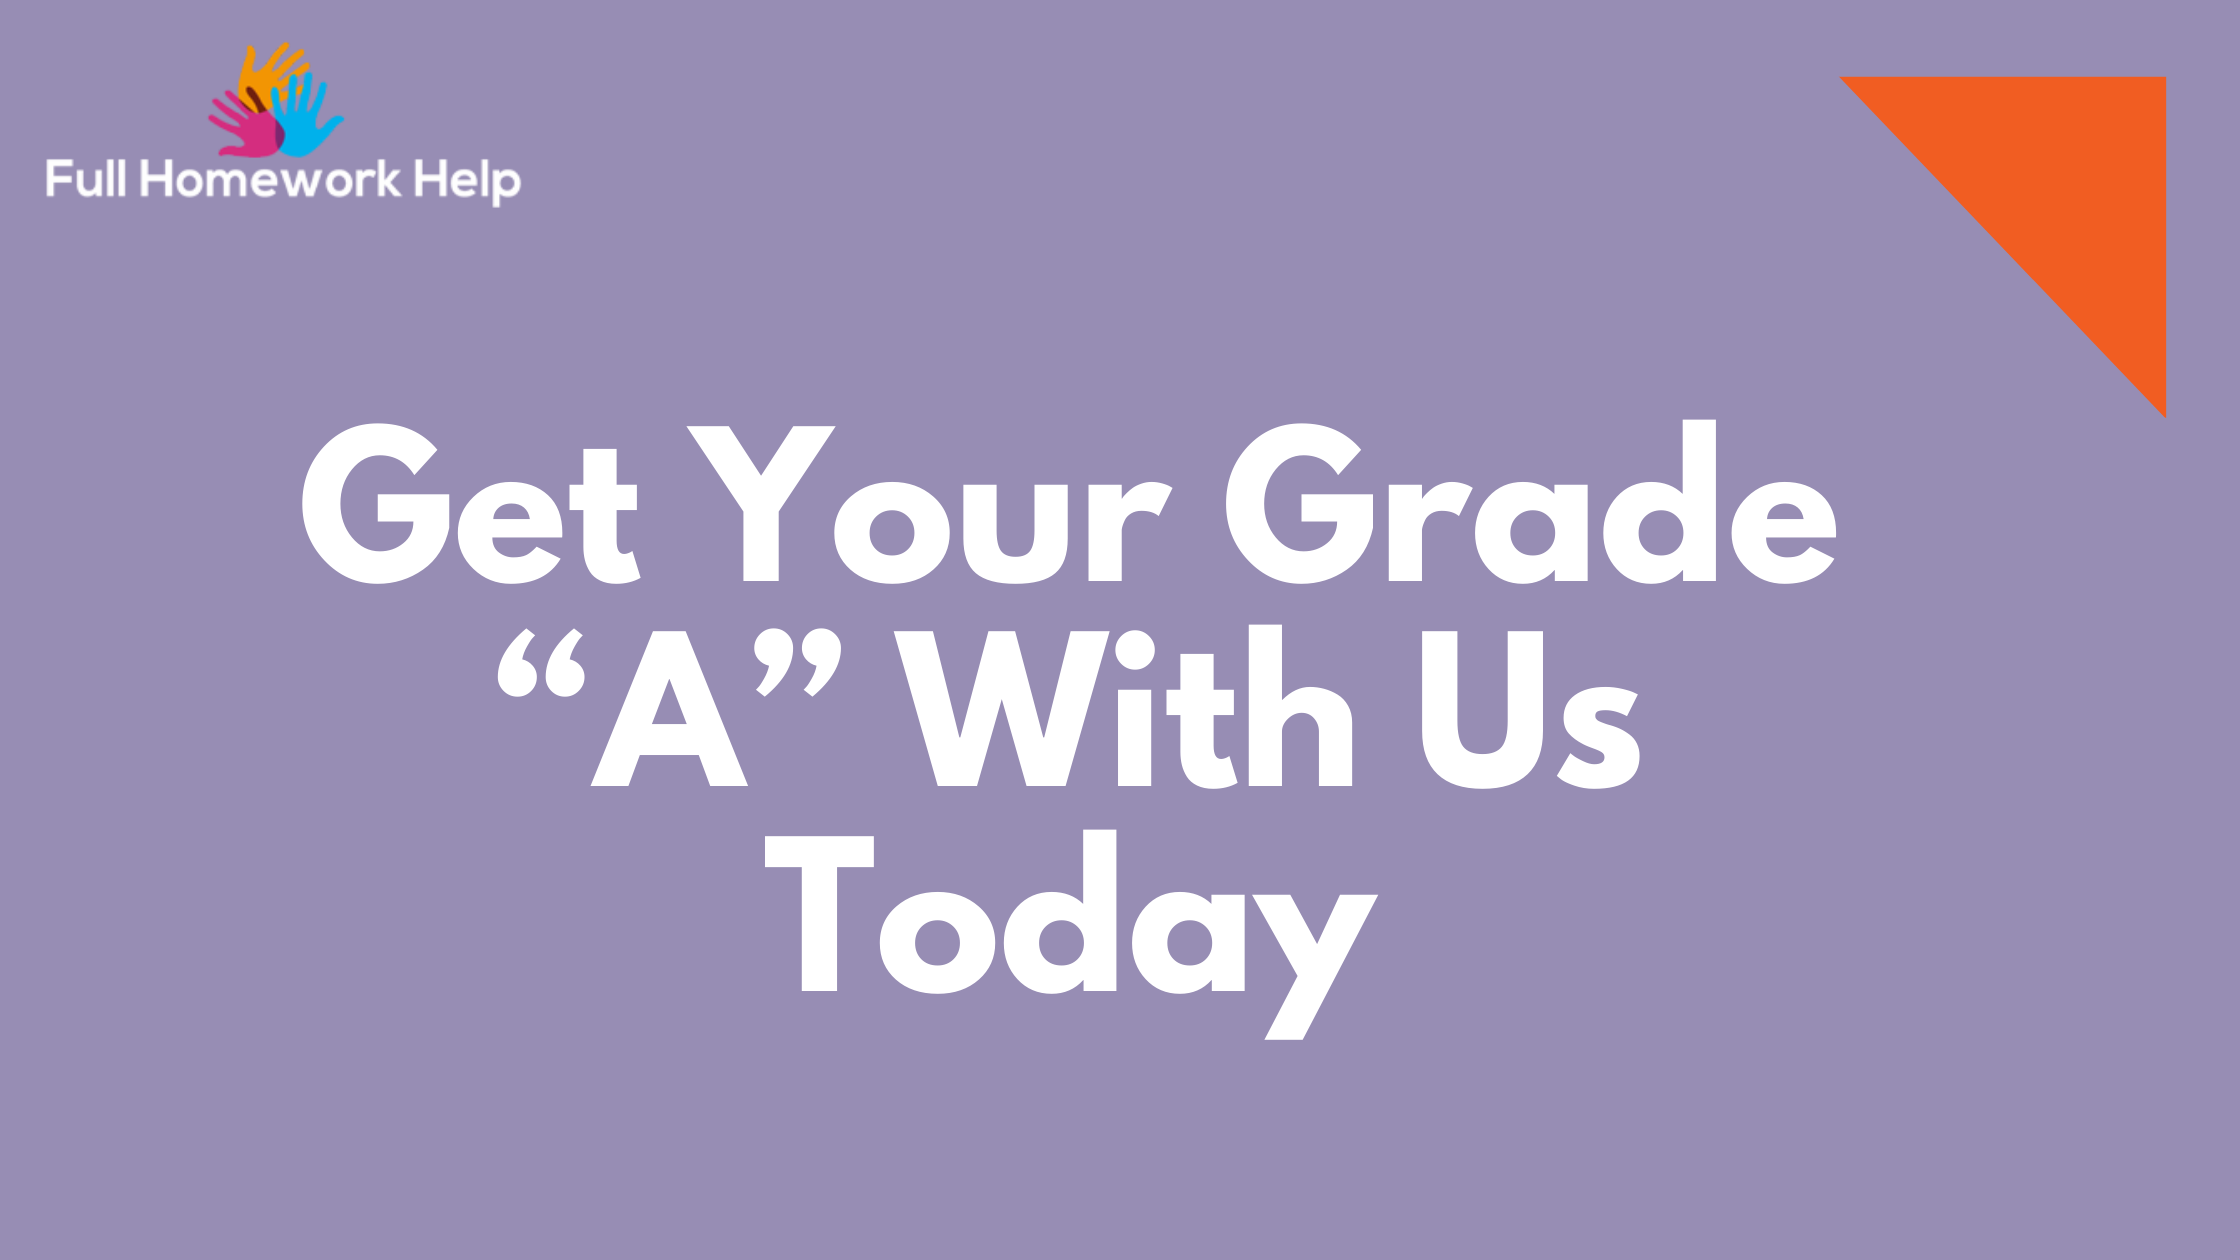 Get Your Grade “A” With Us Today